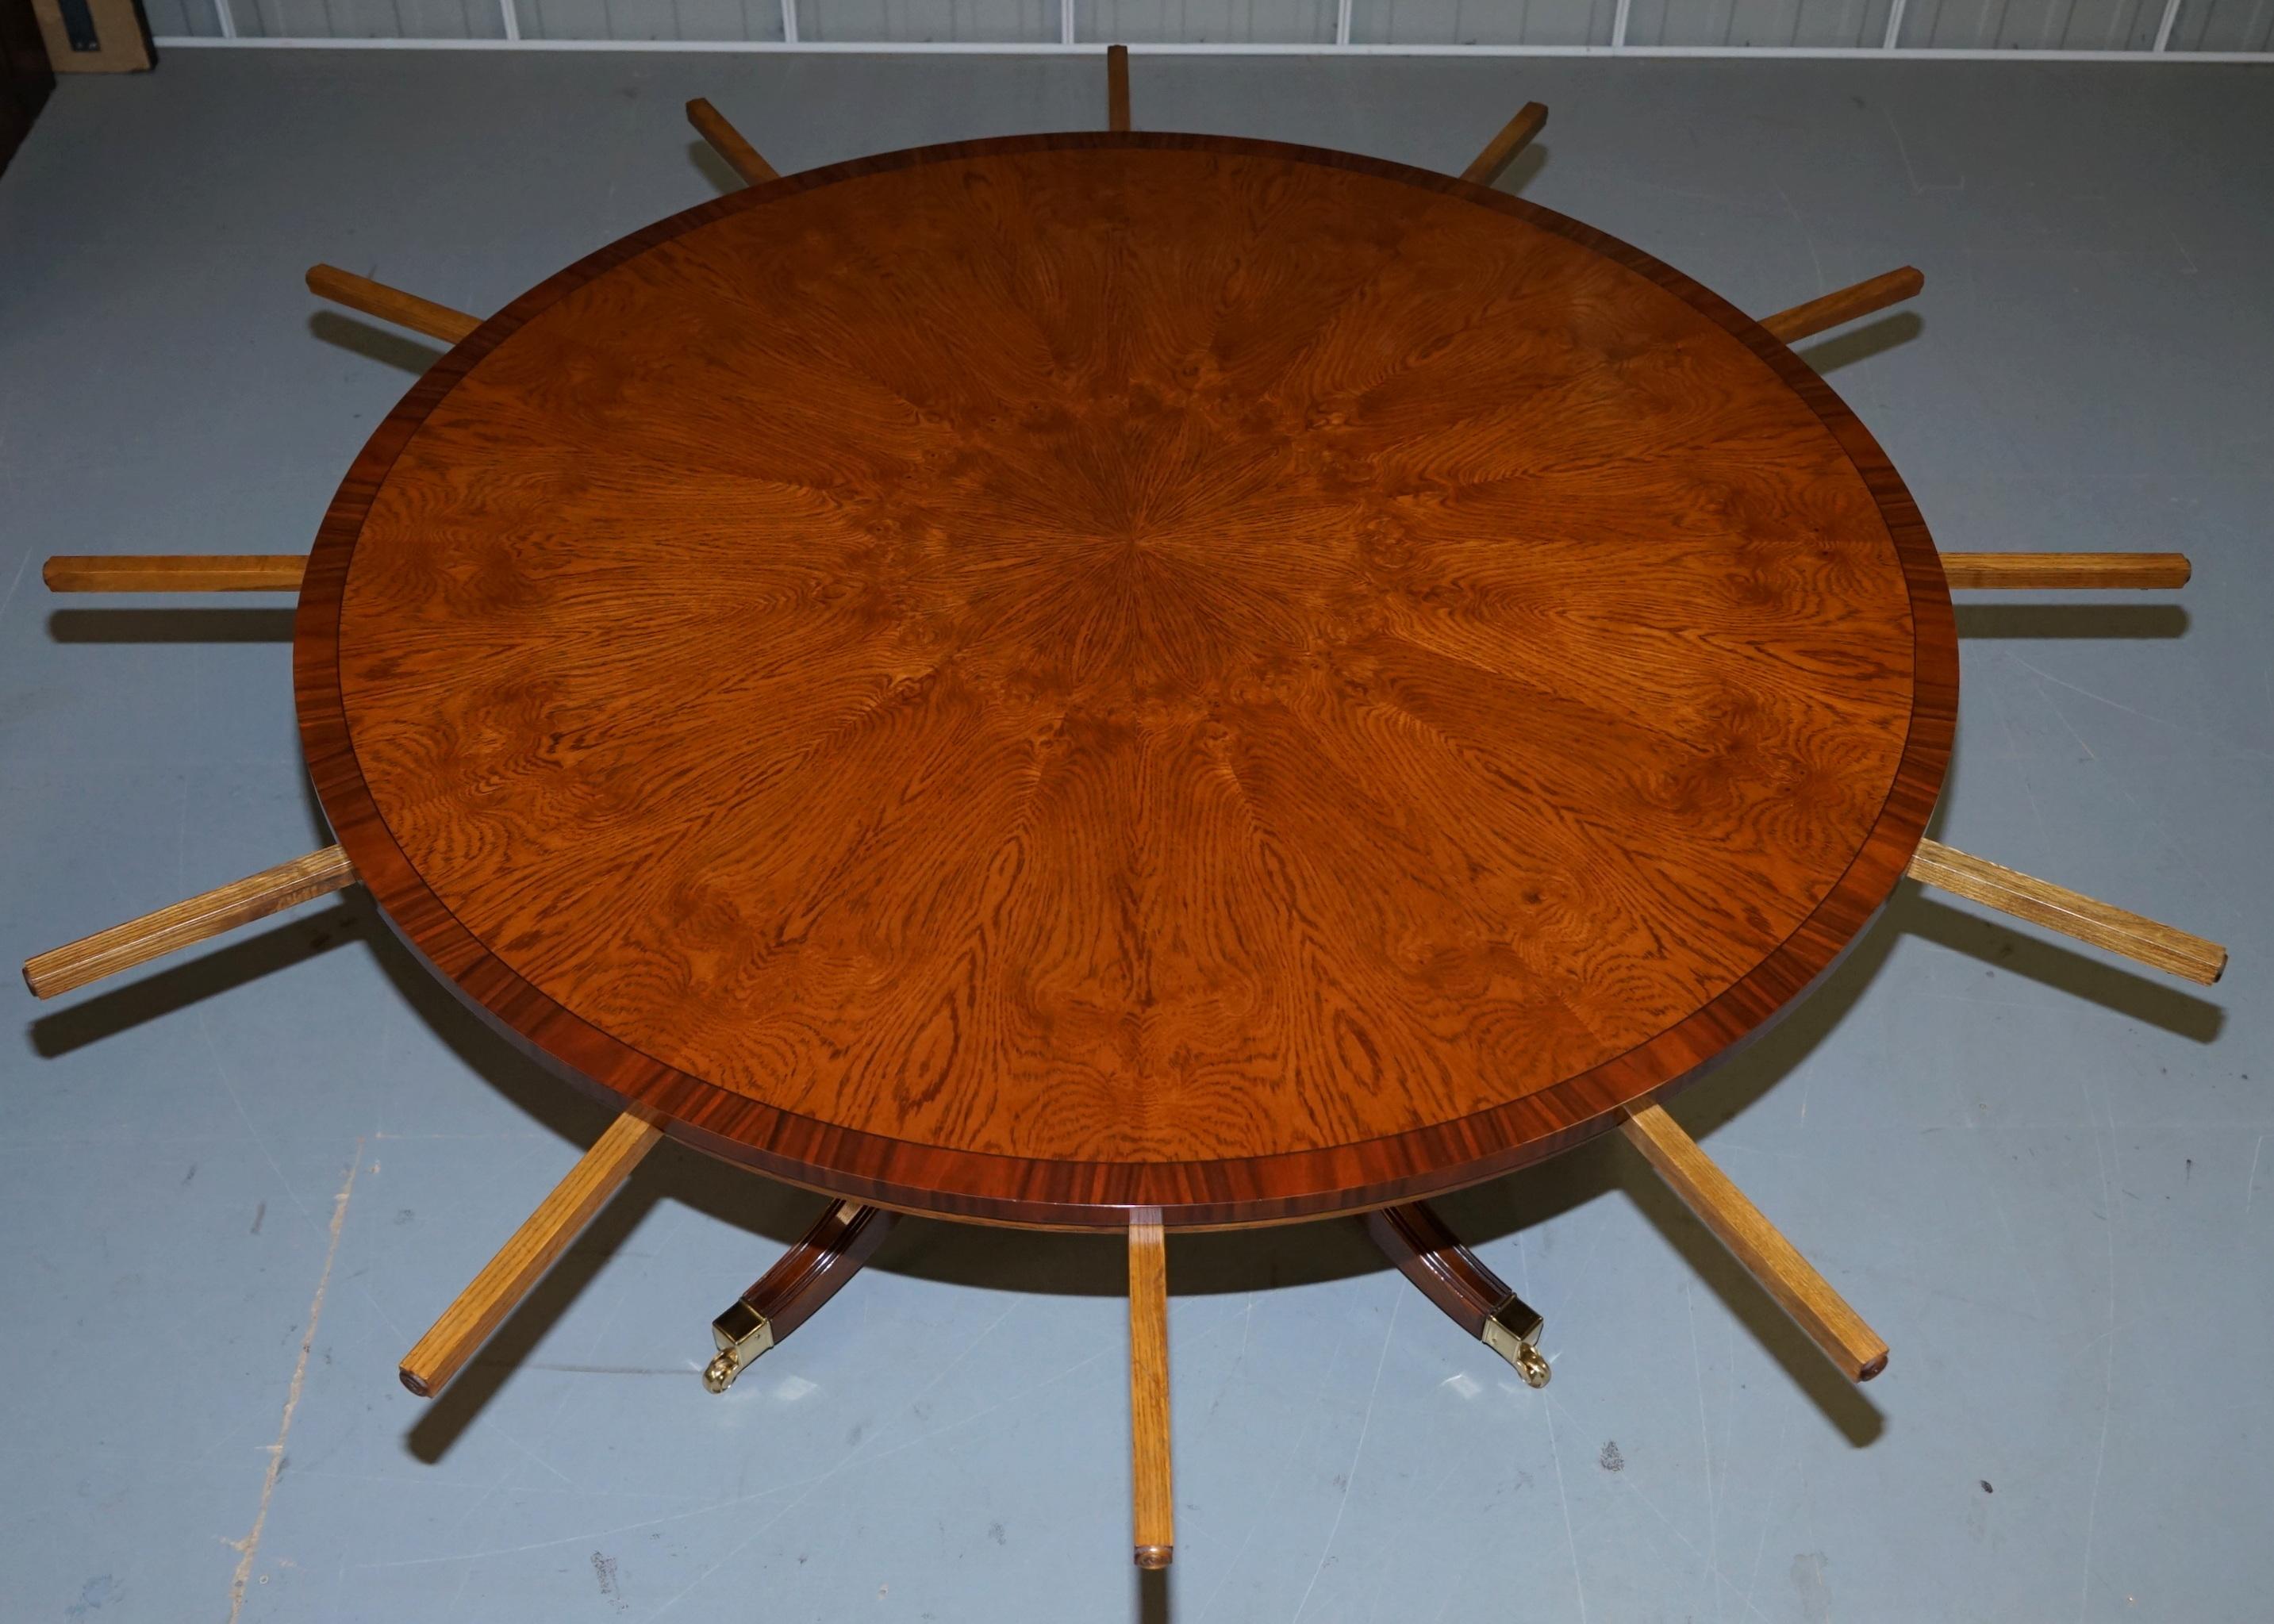 Contemporary Brand New Cluster Oak Extending Jupe Round Dining Tables Seats 6-12 People For Sale